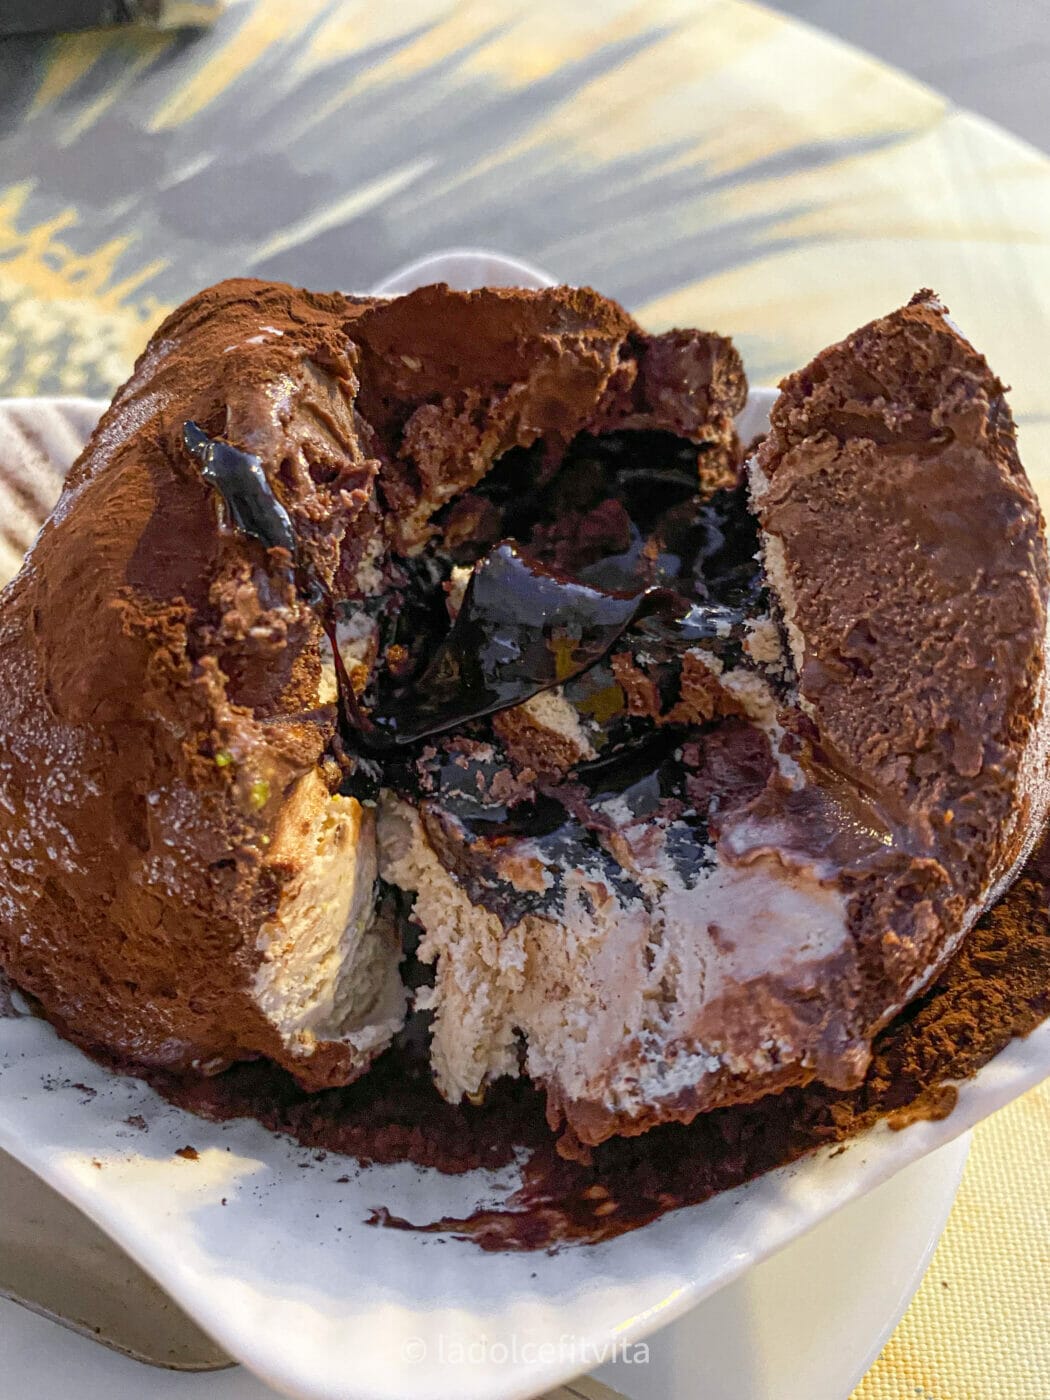 famous Italian chocolate and hazelnut ice cream with molten center called tartufo di pizzo, Calabria